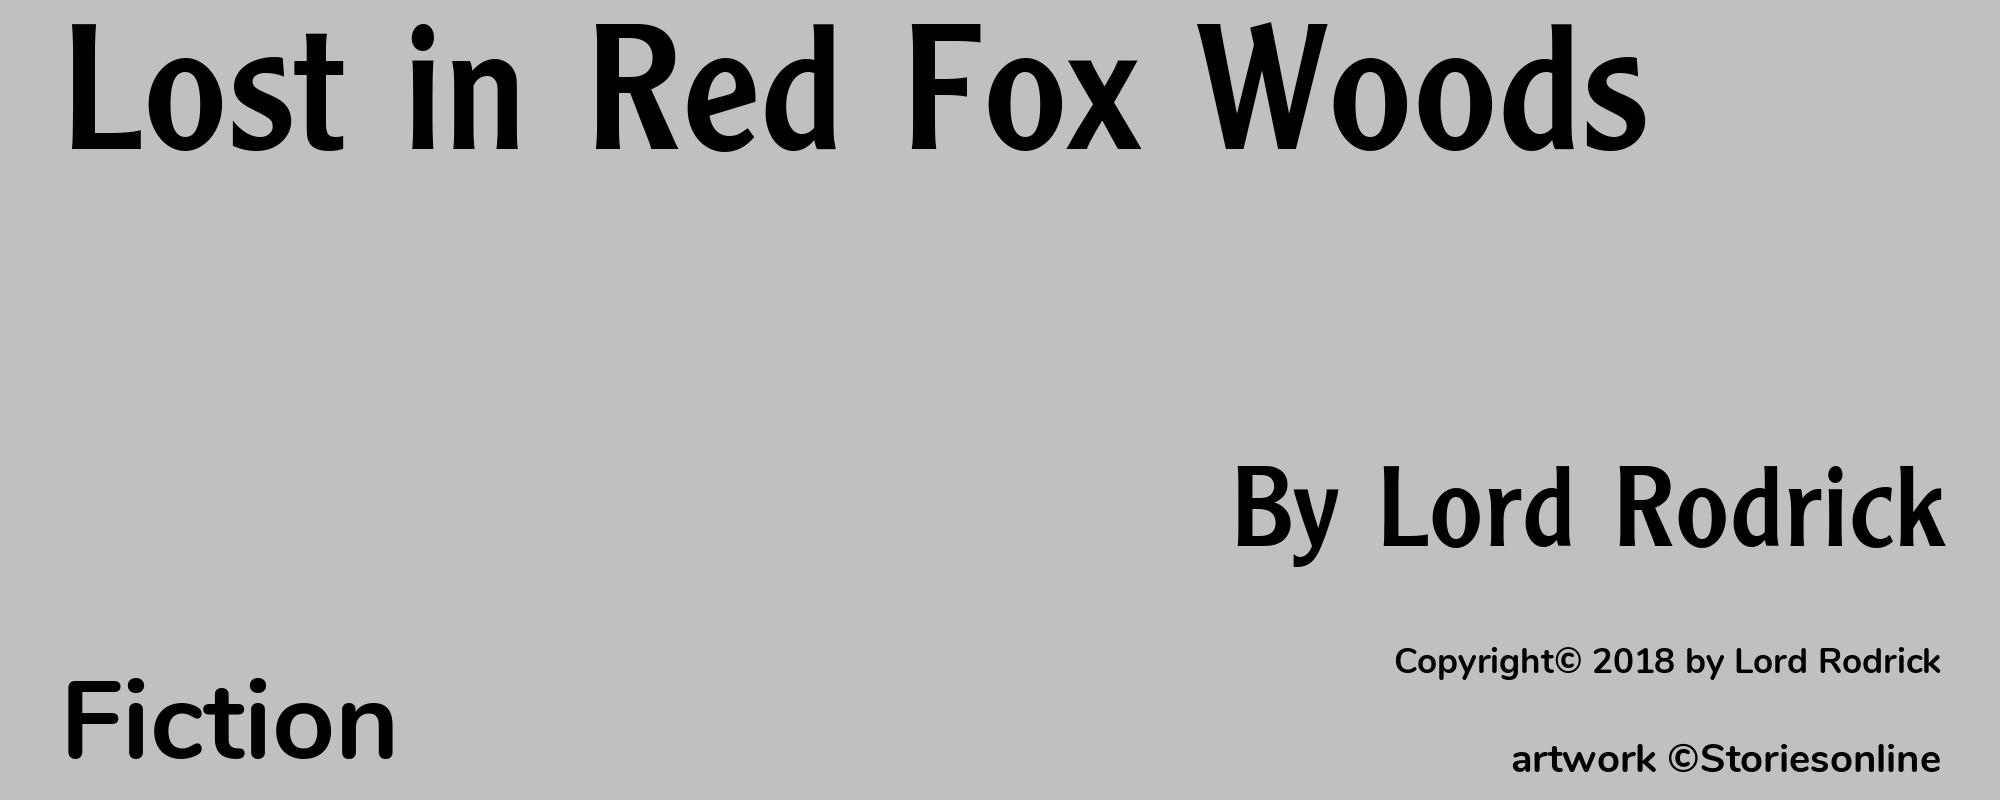 Lost in Red Fox Woods - Cover